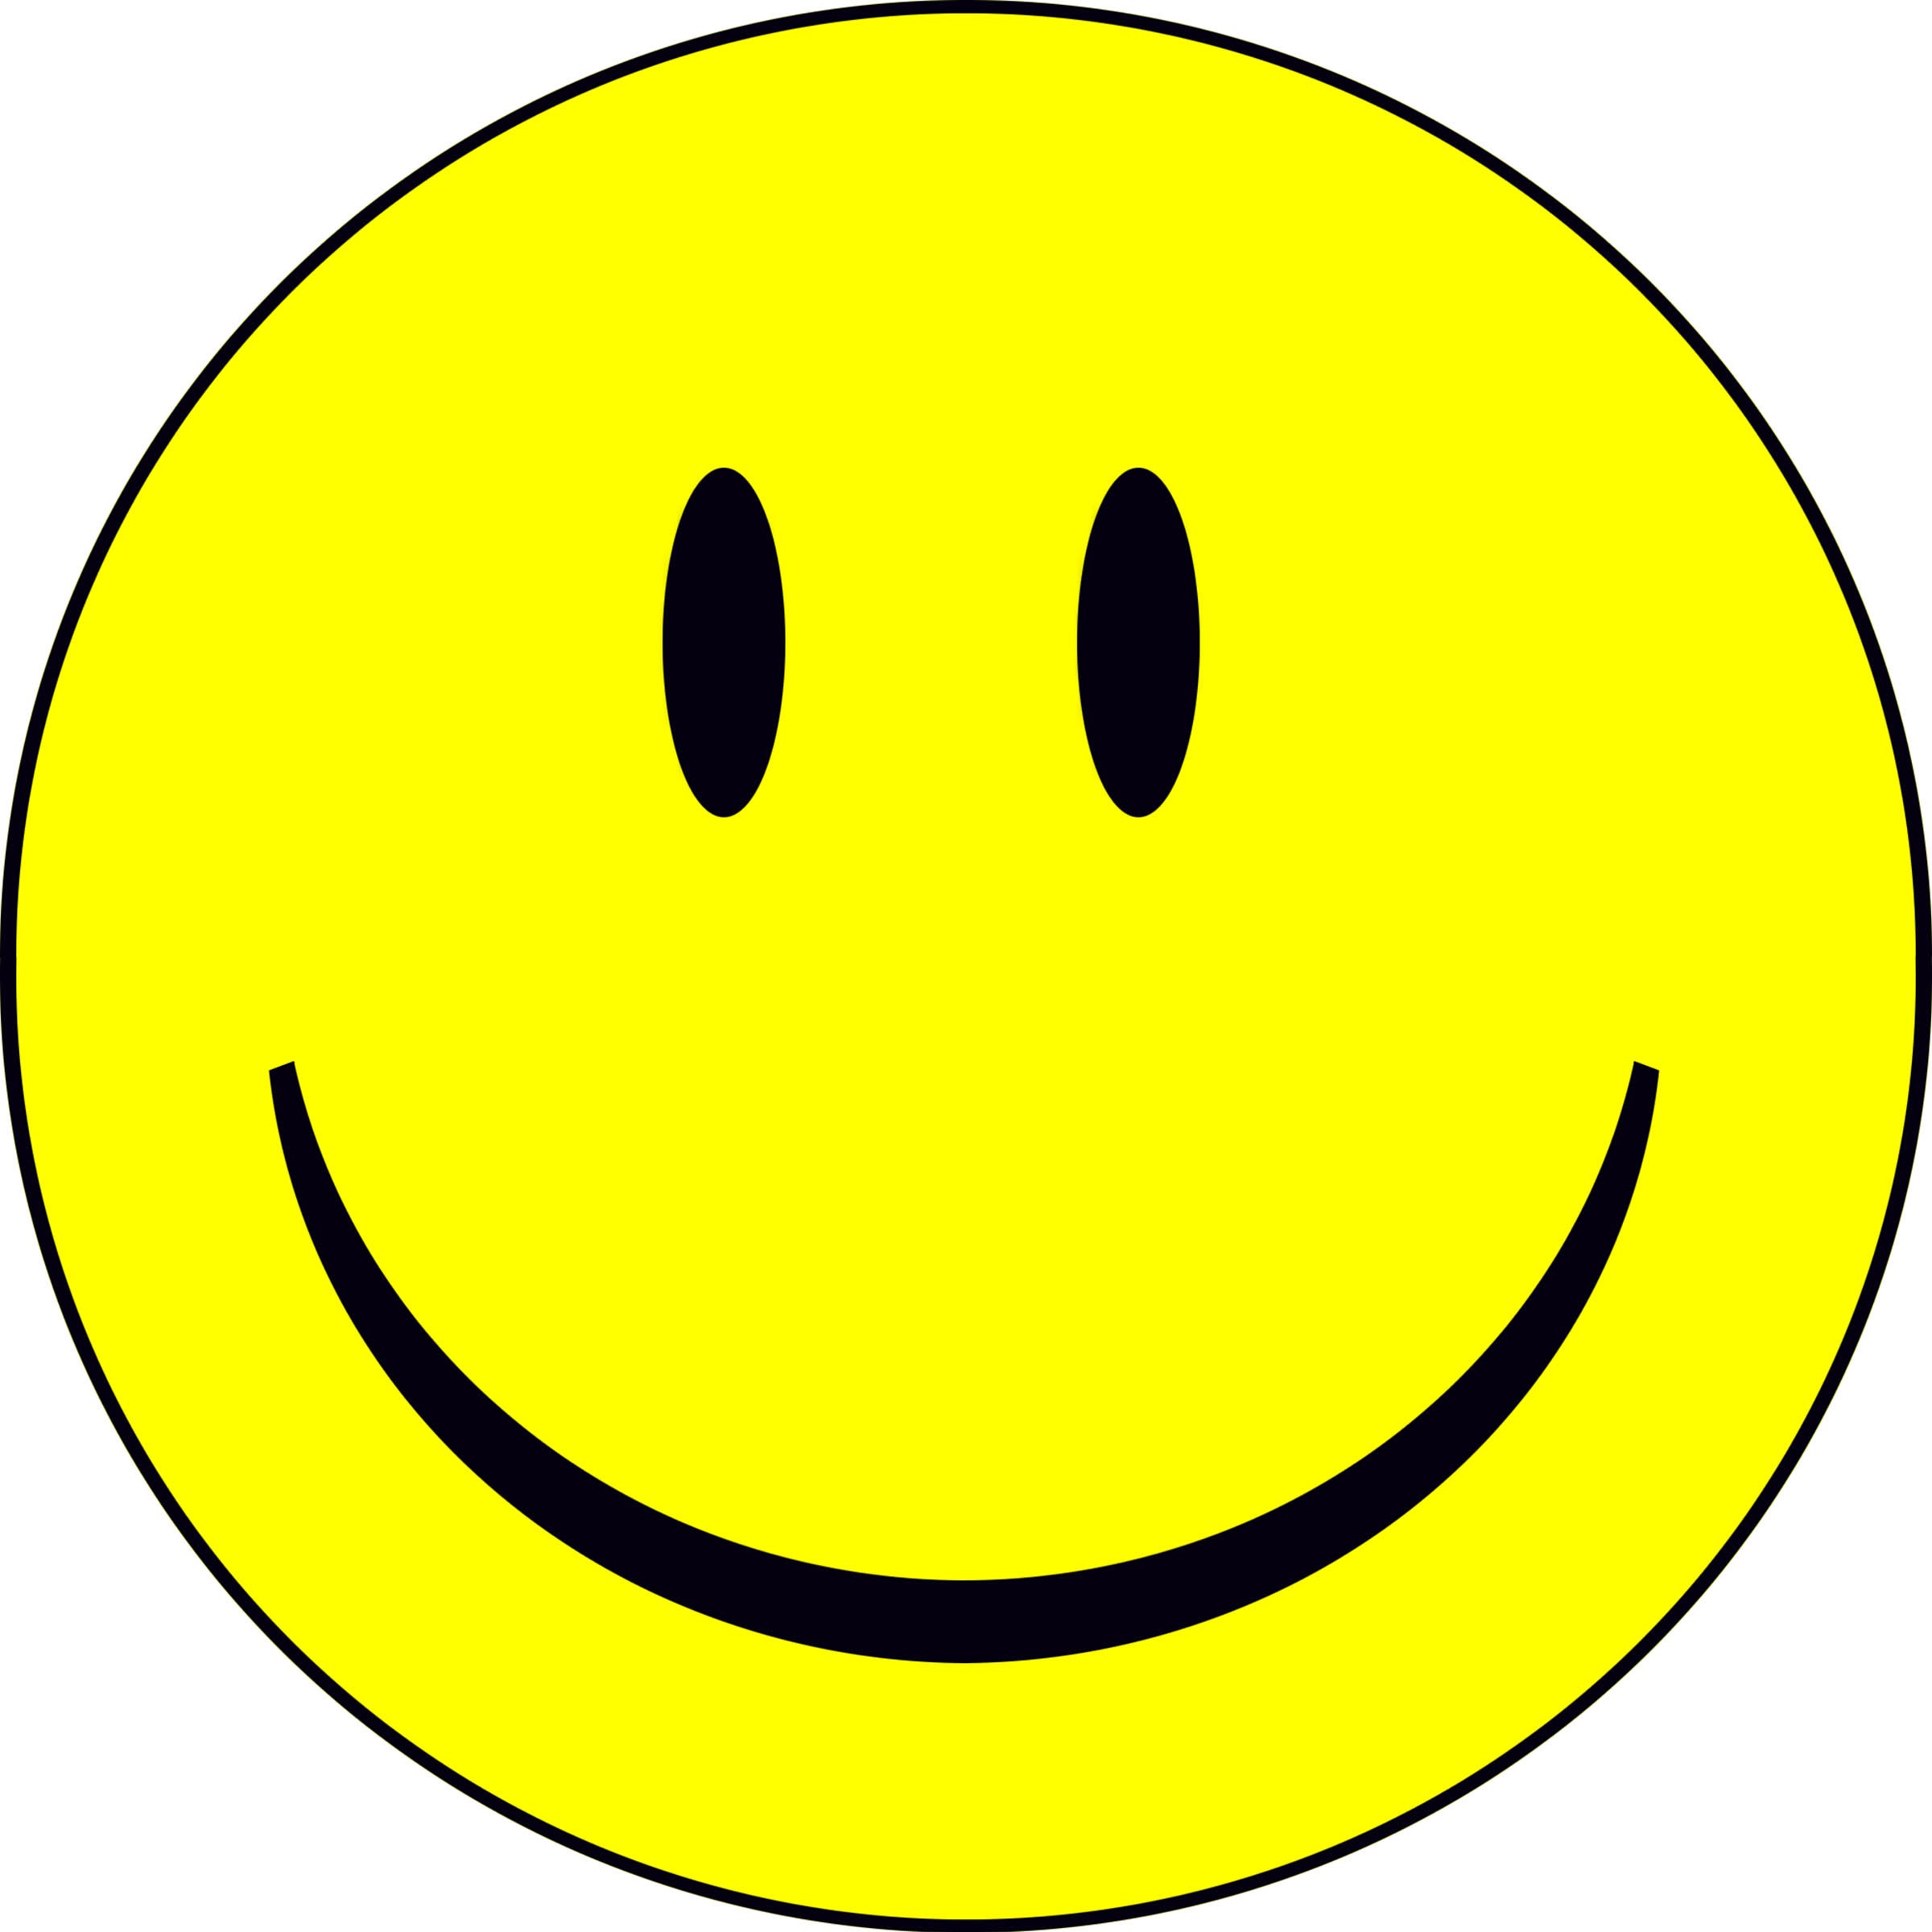 Free Smiley Face Clipart | Fr